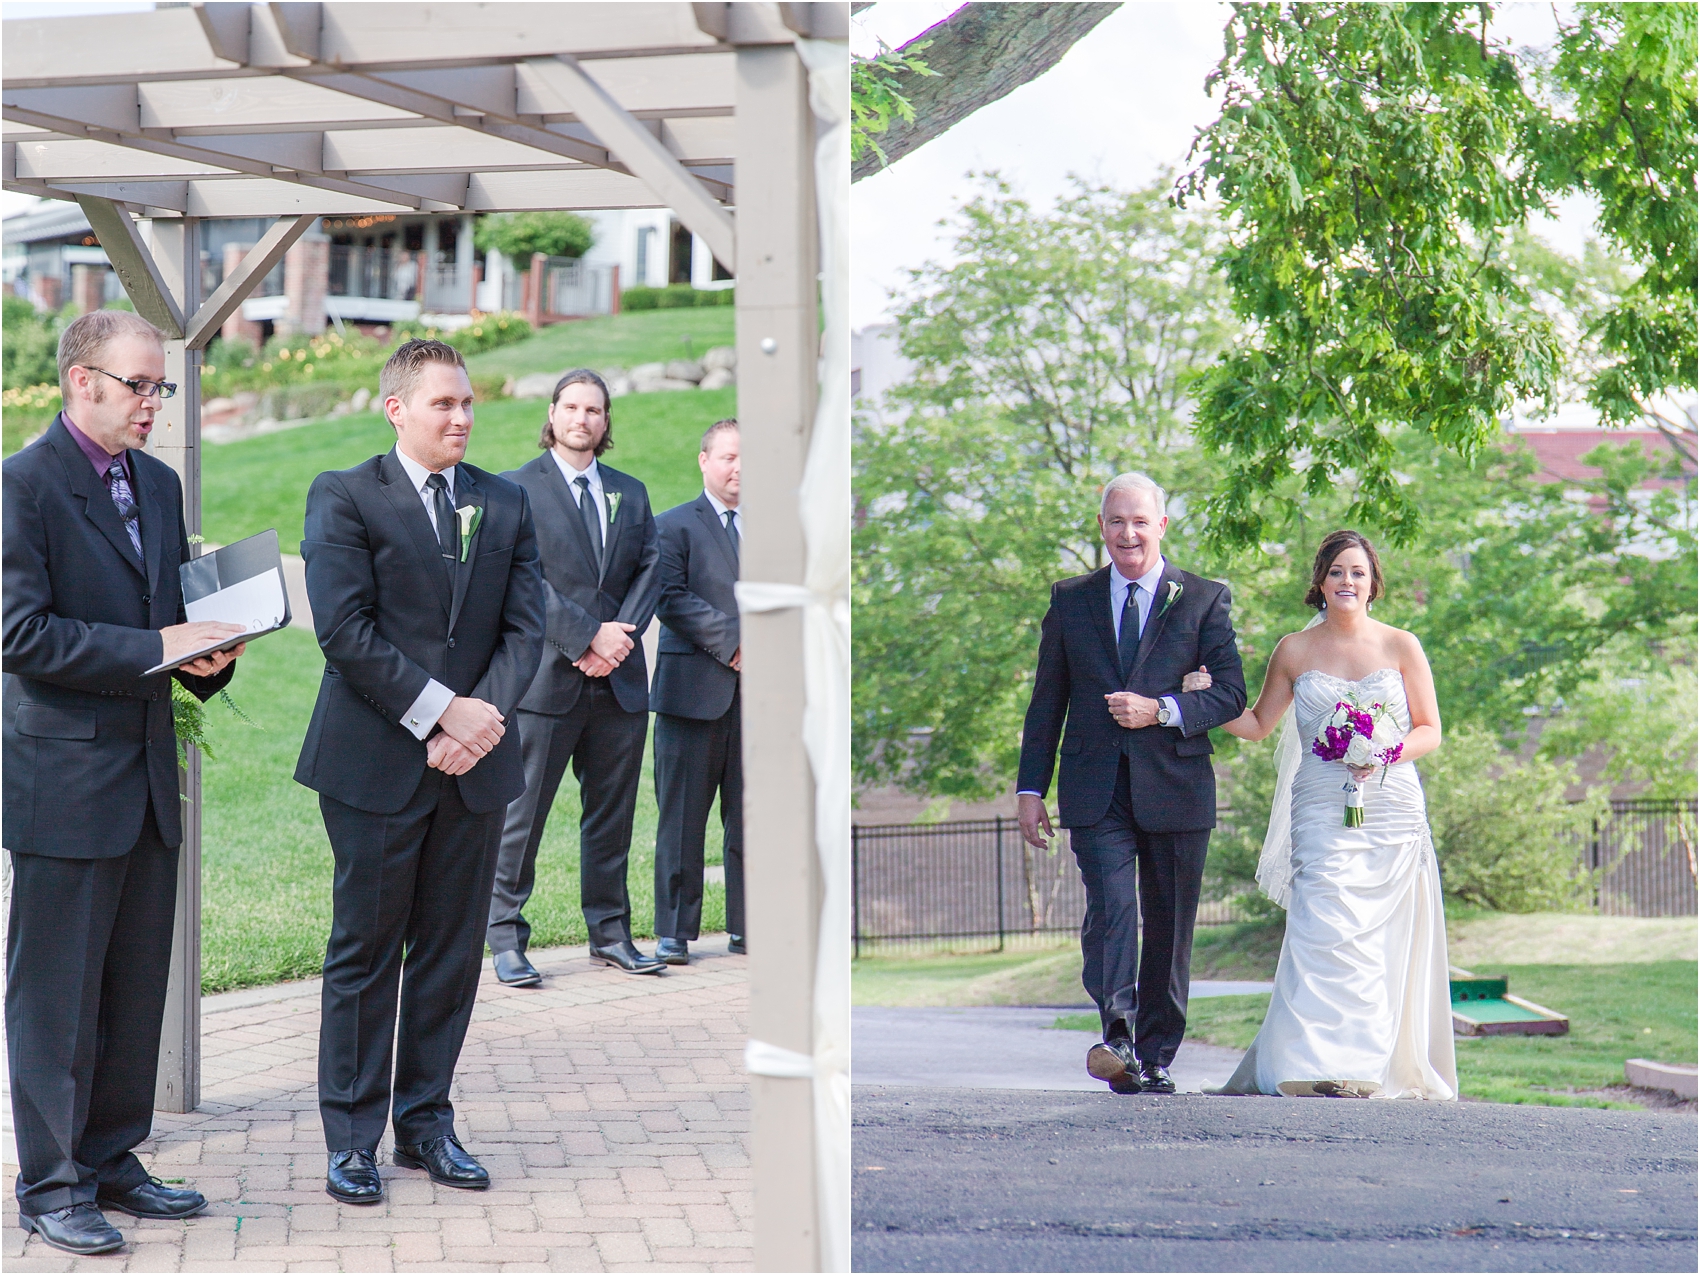 classic-wedding-photos-at-great-oaks-country-club-in-rochester-hills-mi-by-courtney-carolyn-photography_0066.jpg